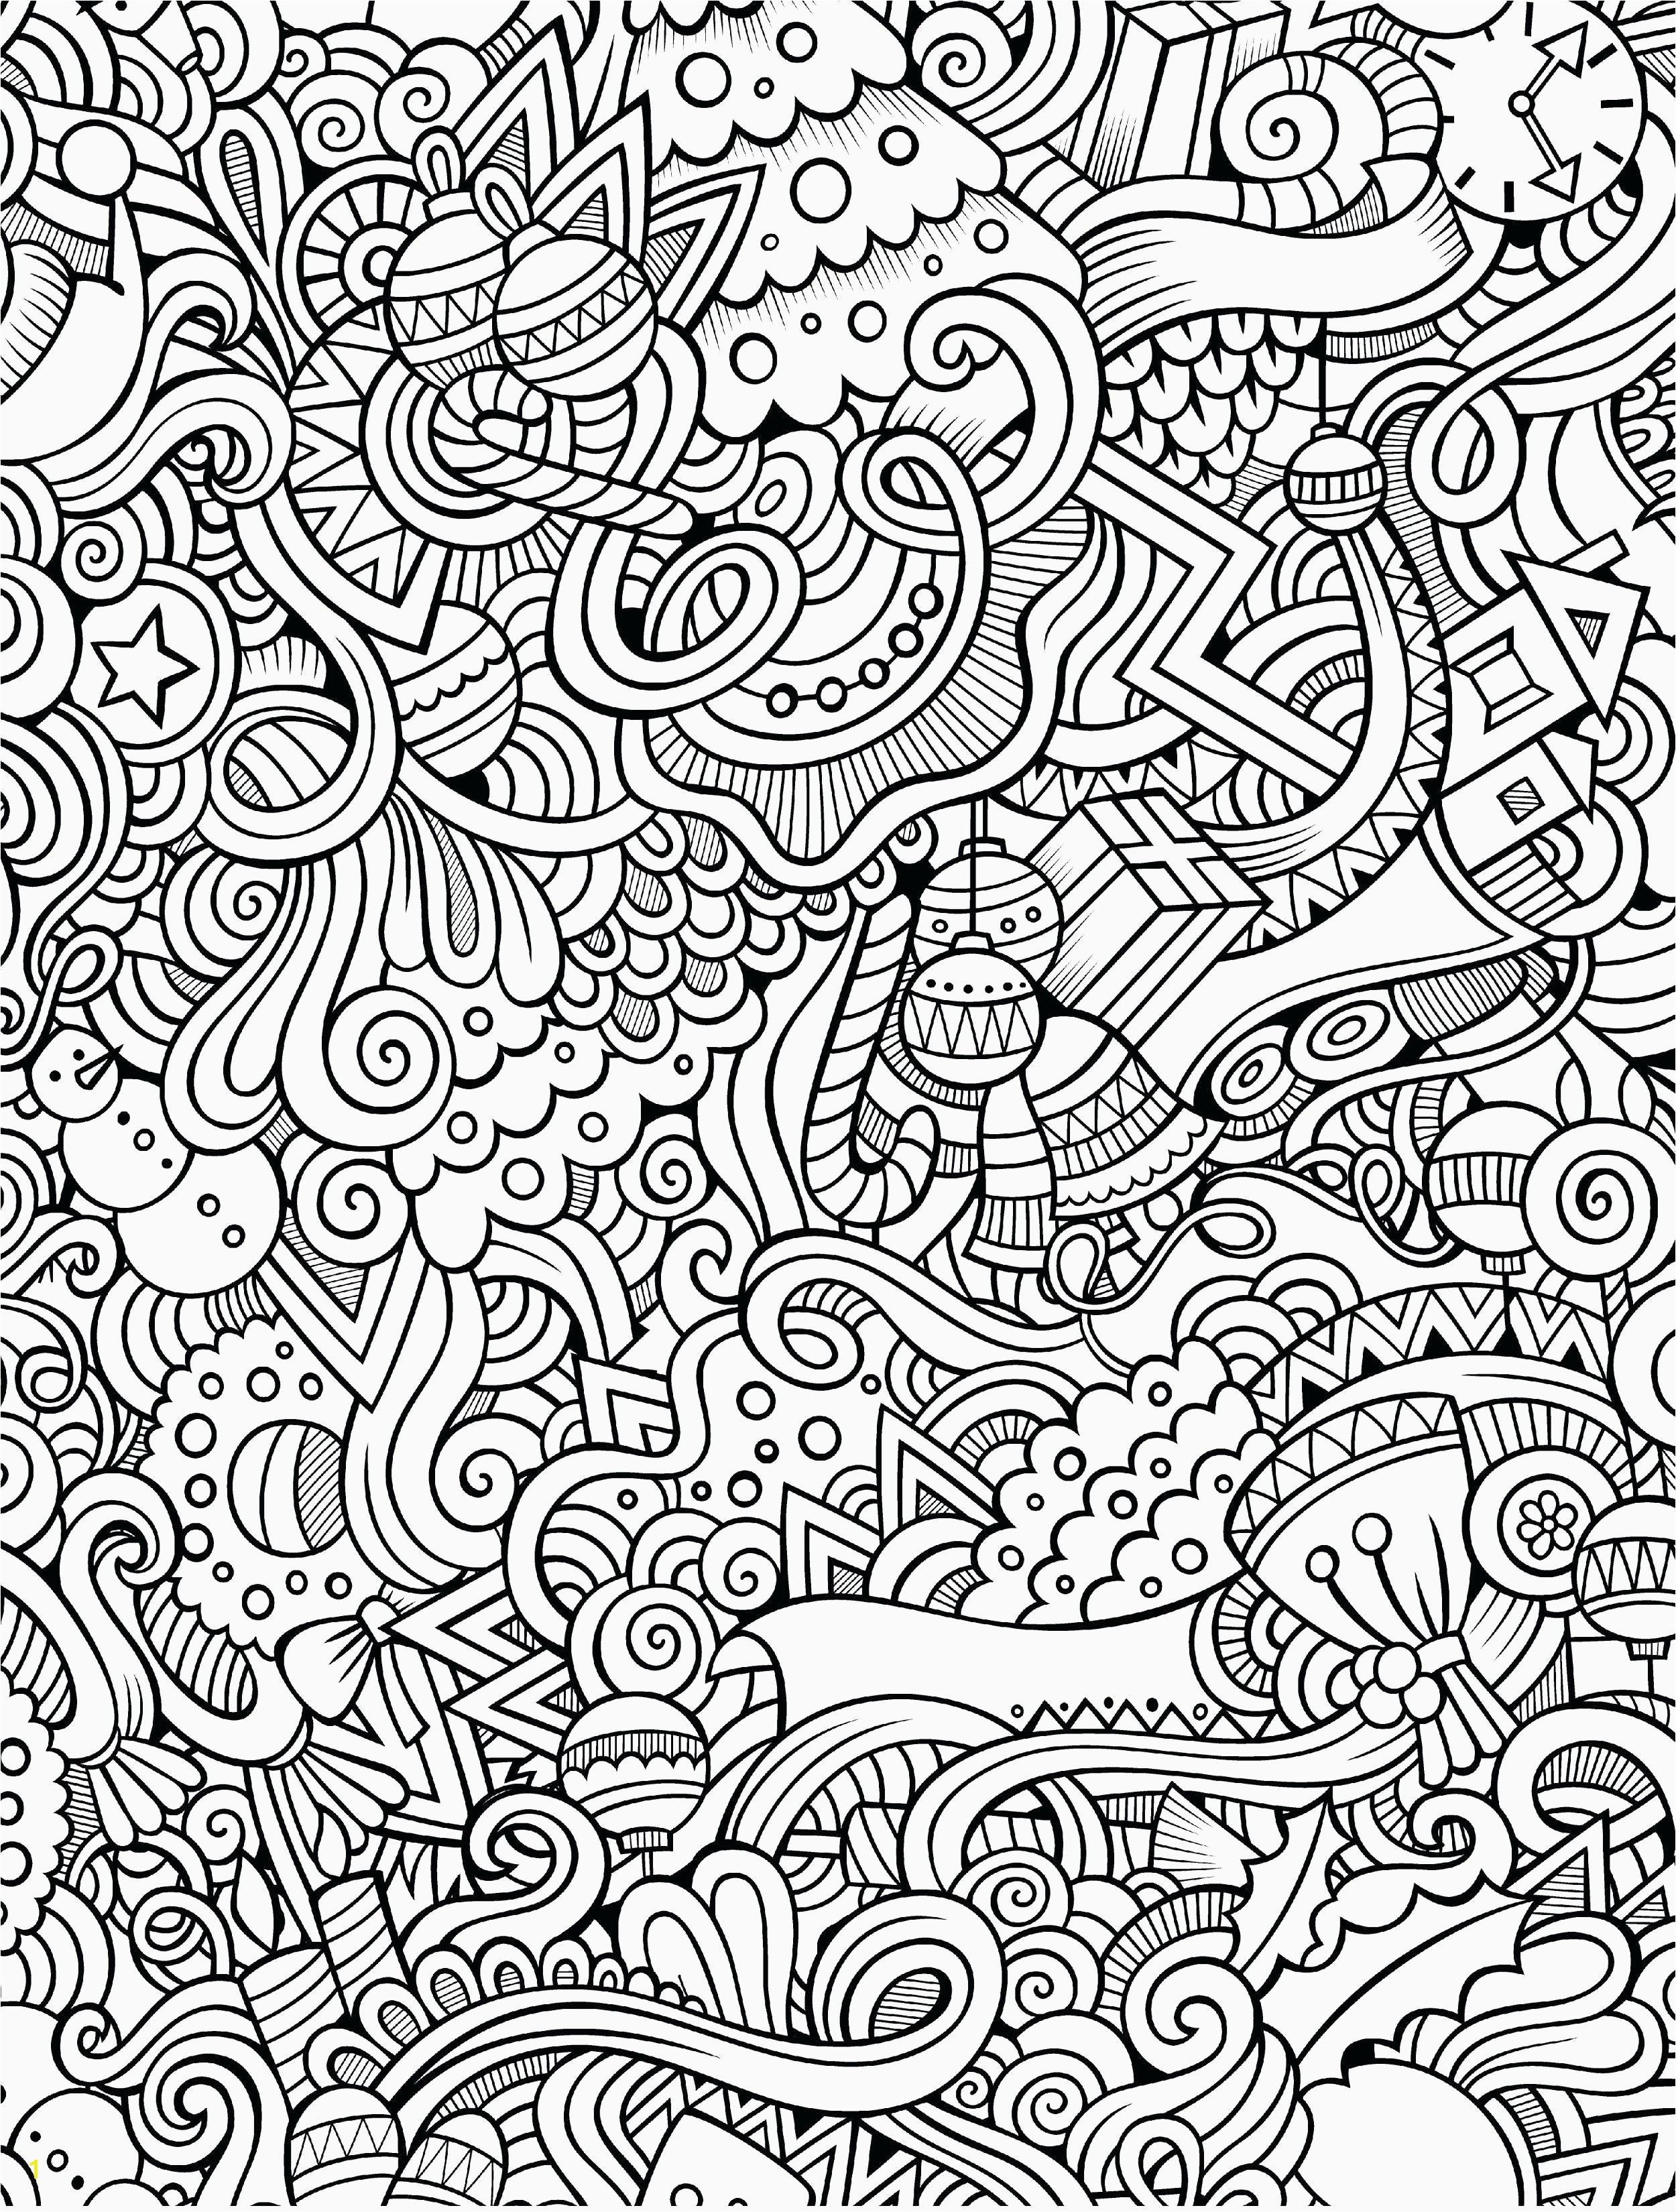 Awesome Coloring Page for Adult Od Kids Simple Floral Heart with